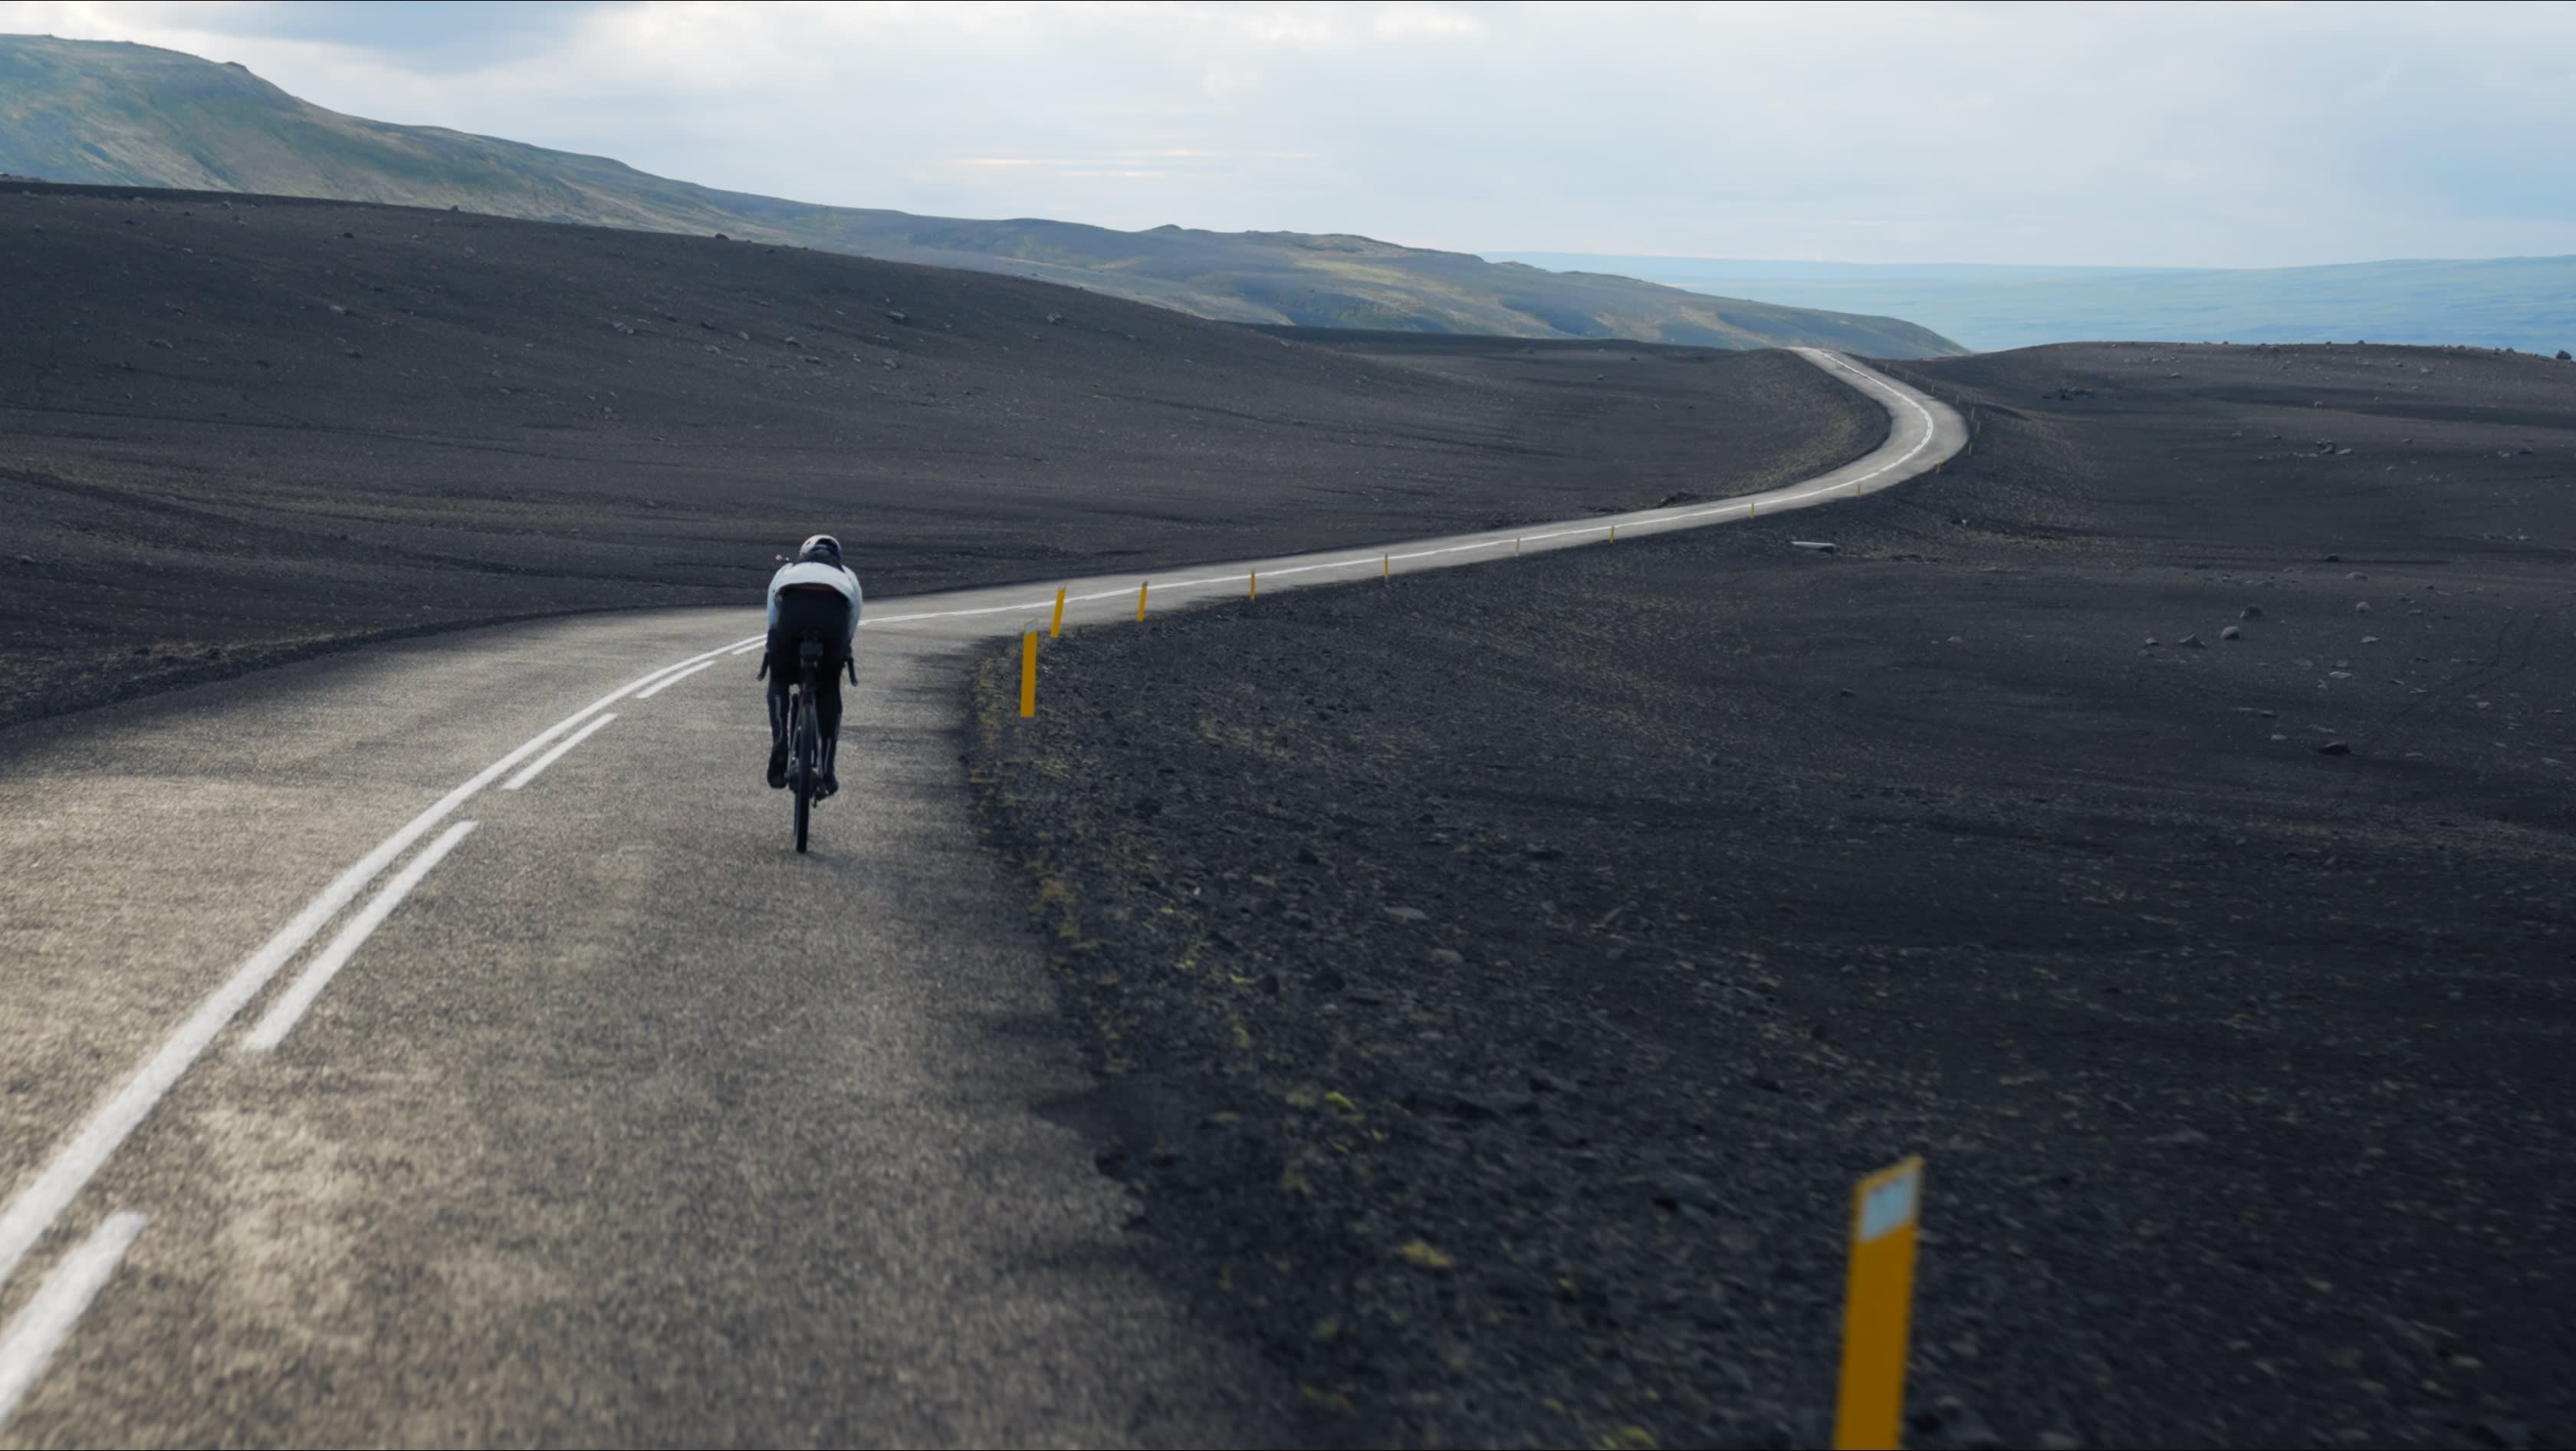 Cycling Ftk Attempt Payson Mcelveen Crosses Iceland